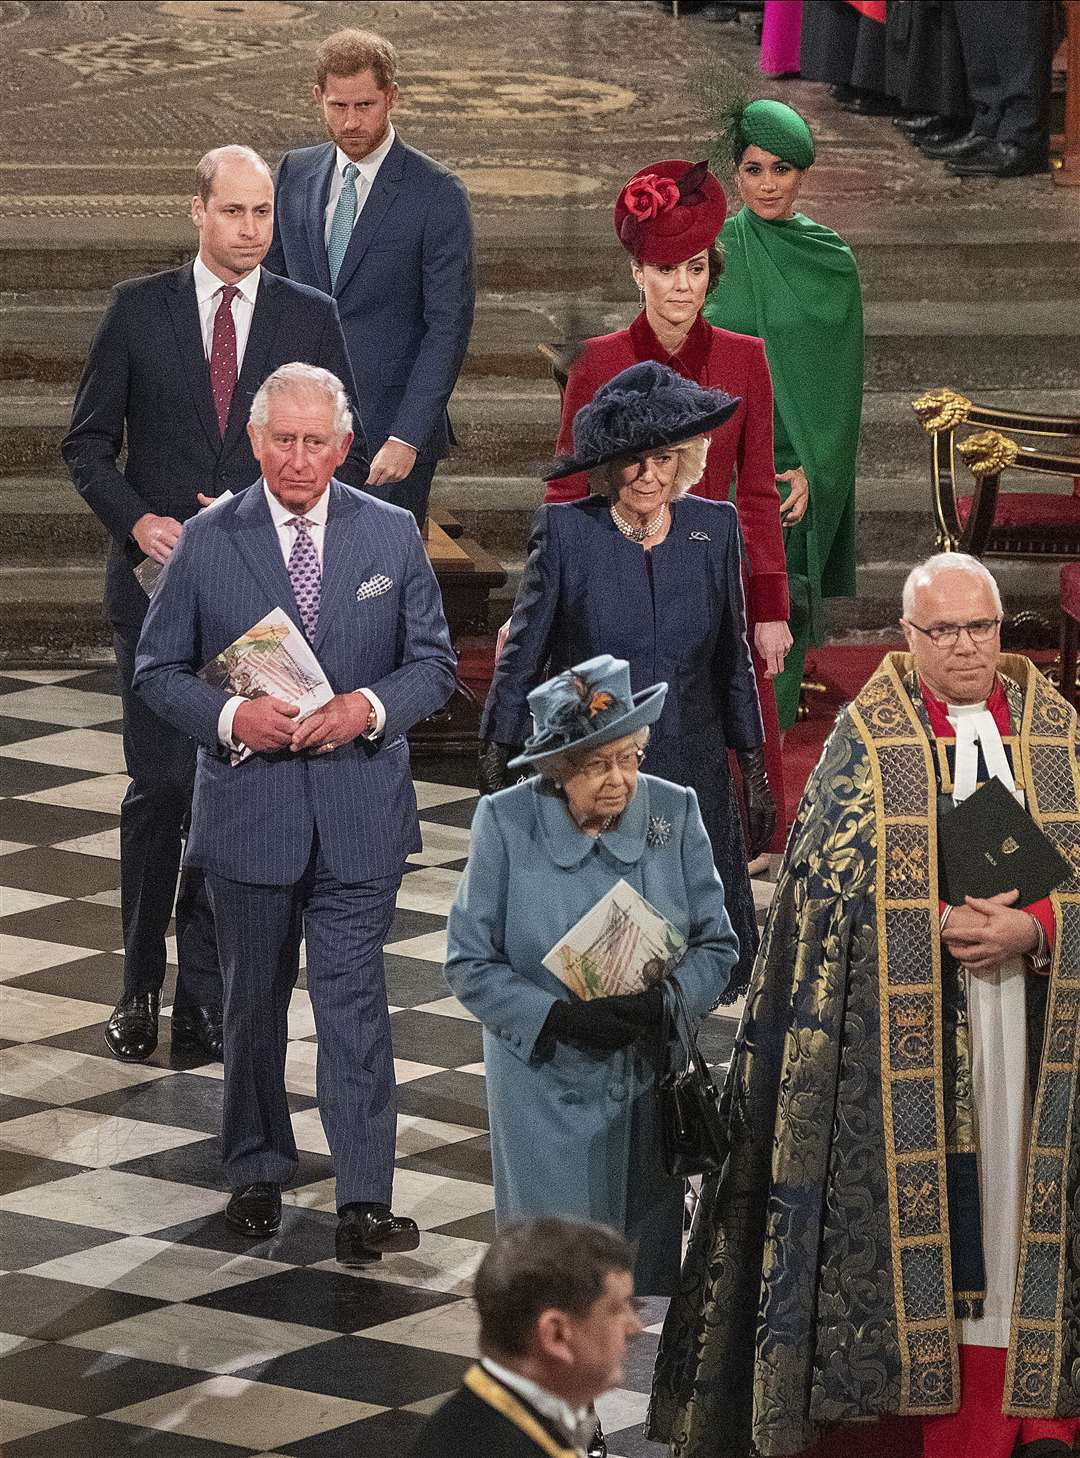 The Queen and the royal family at the Commonwealth Day service – the Duke and Duchess of Sussex’s final official engagement before Megxit (Phil Harris/Daily Mirror/PA)